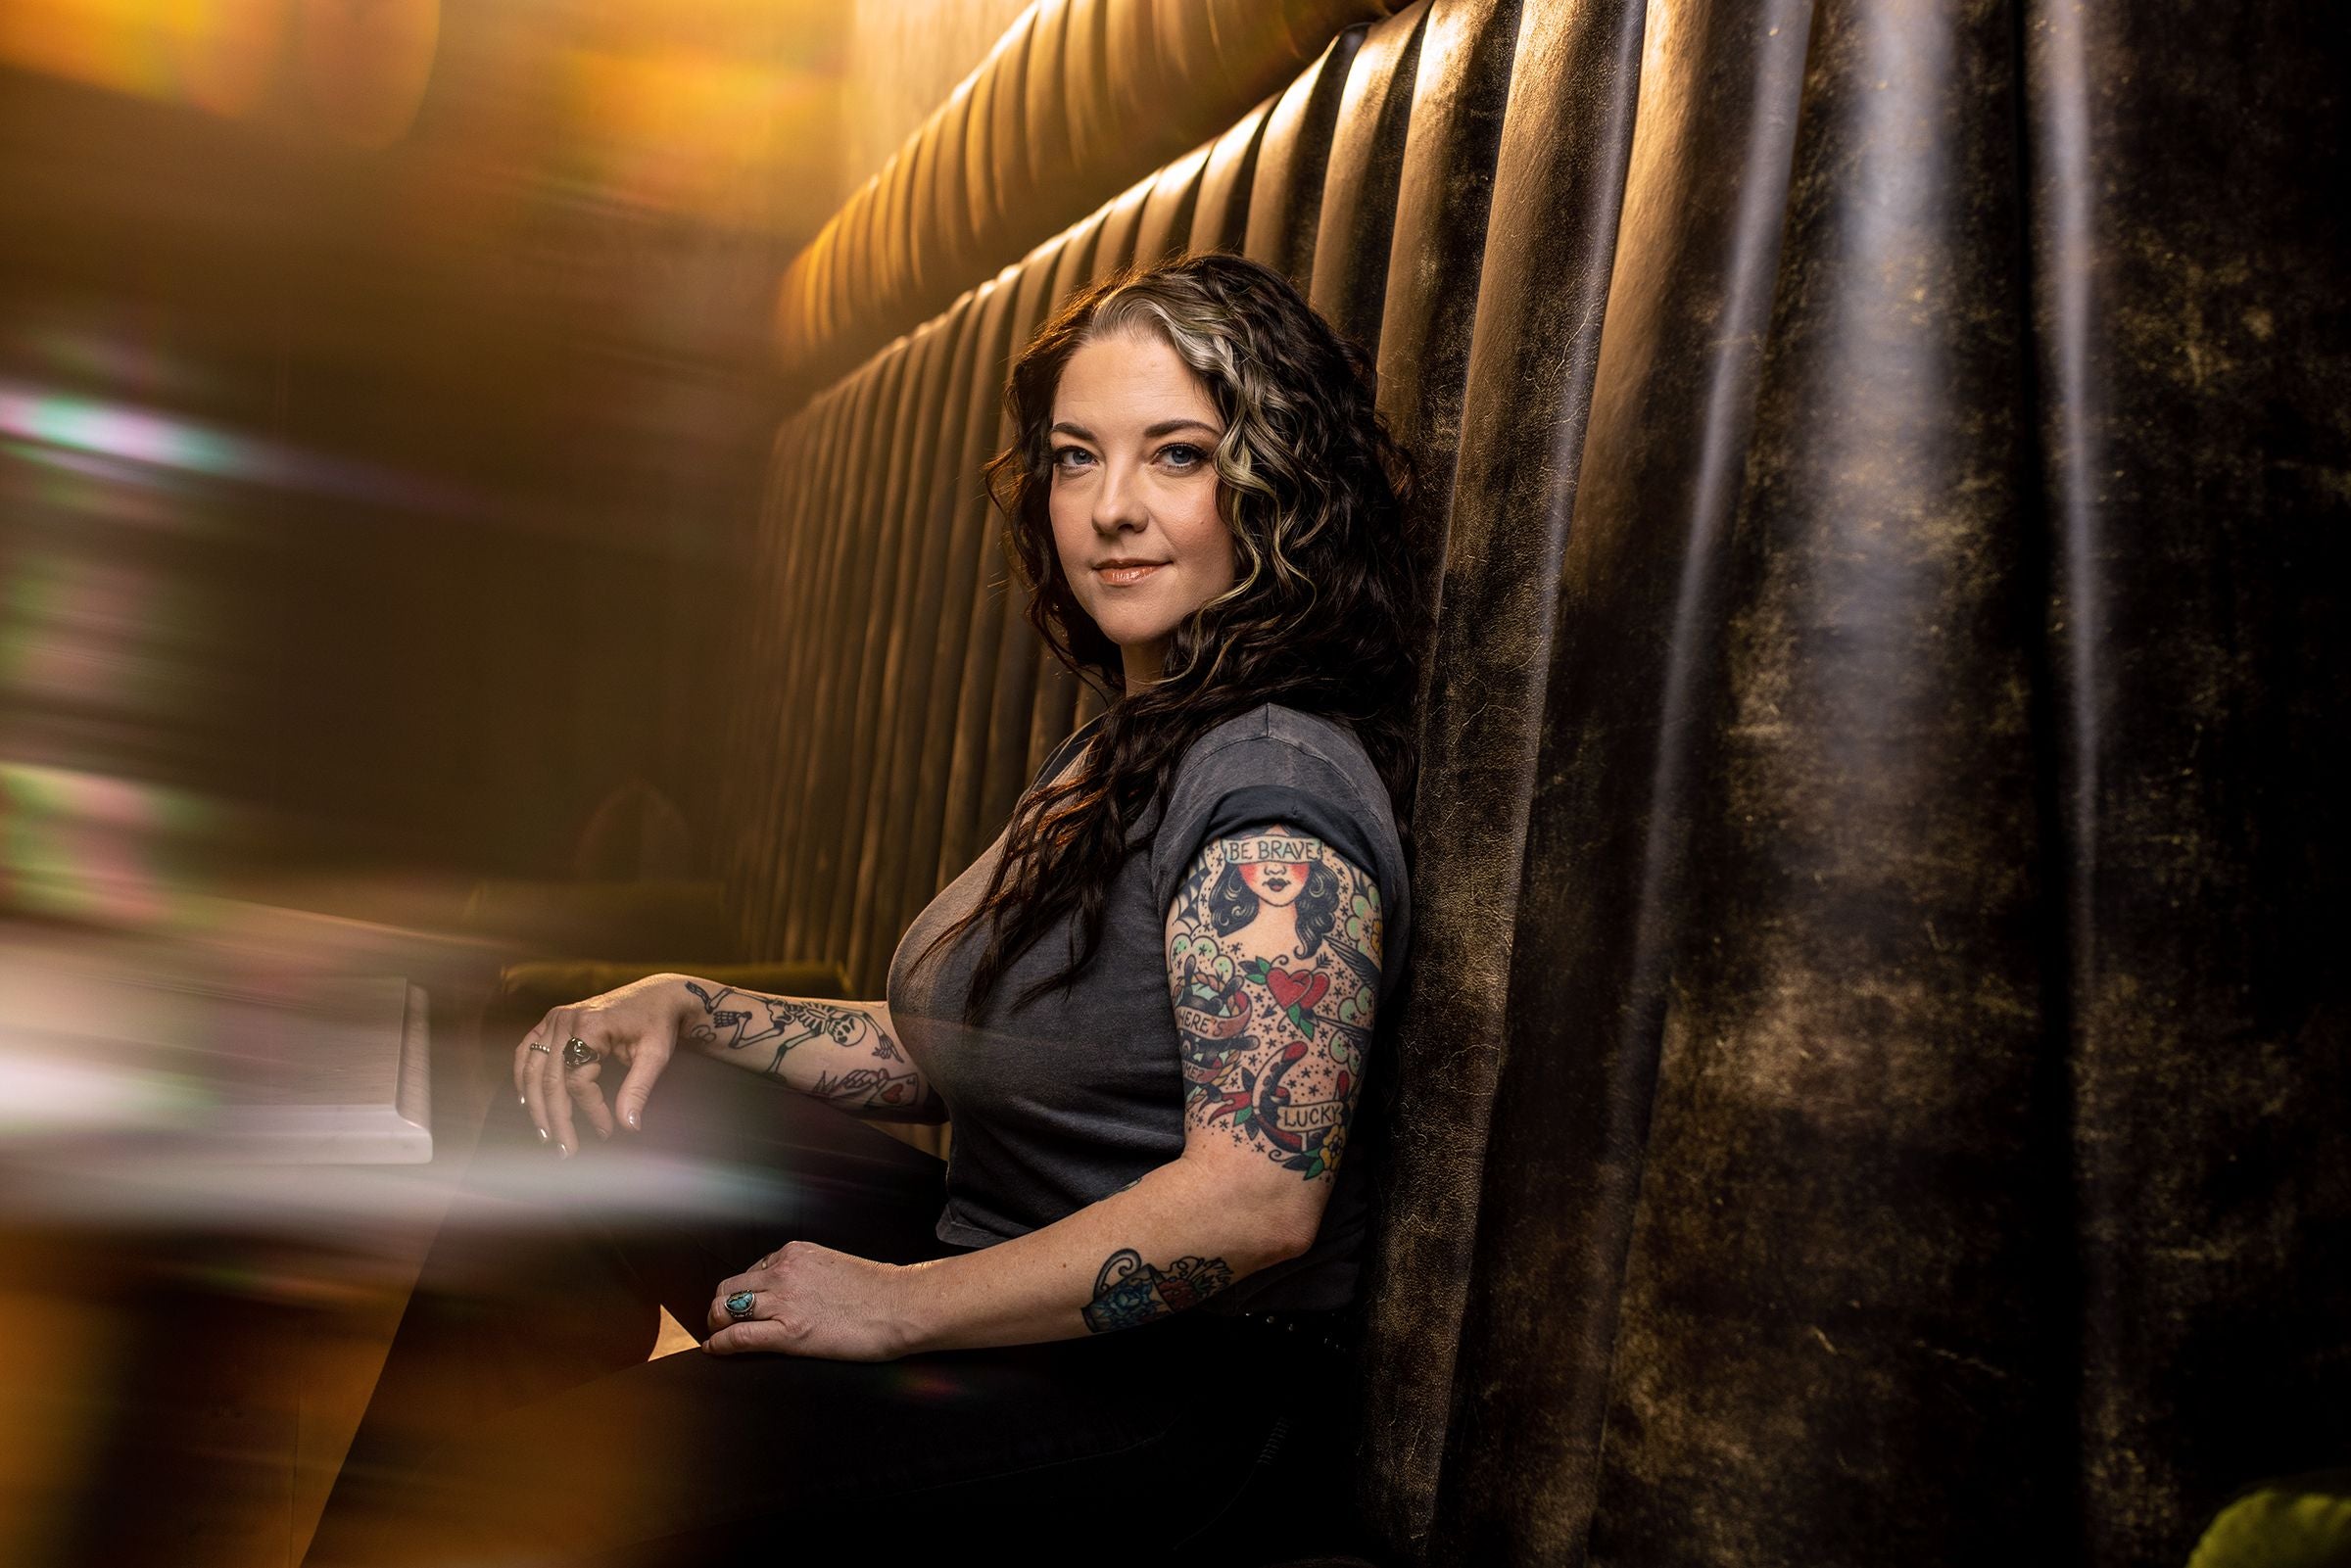 Ashley McBryde: The Devil I Know Tour at Goodyear Theater